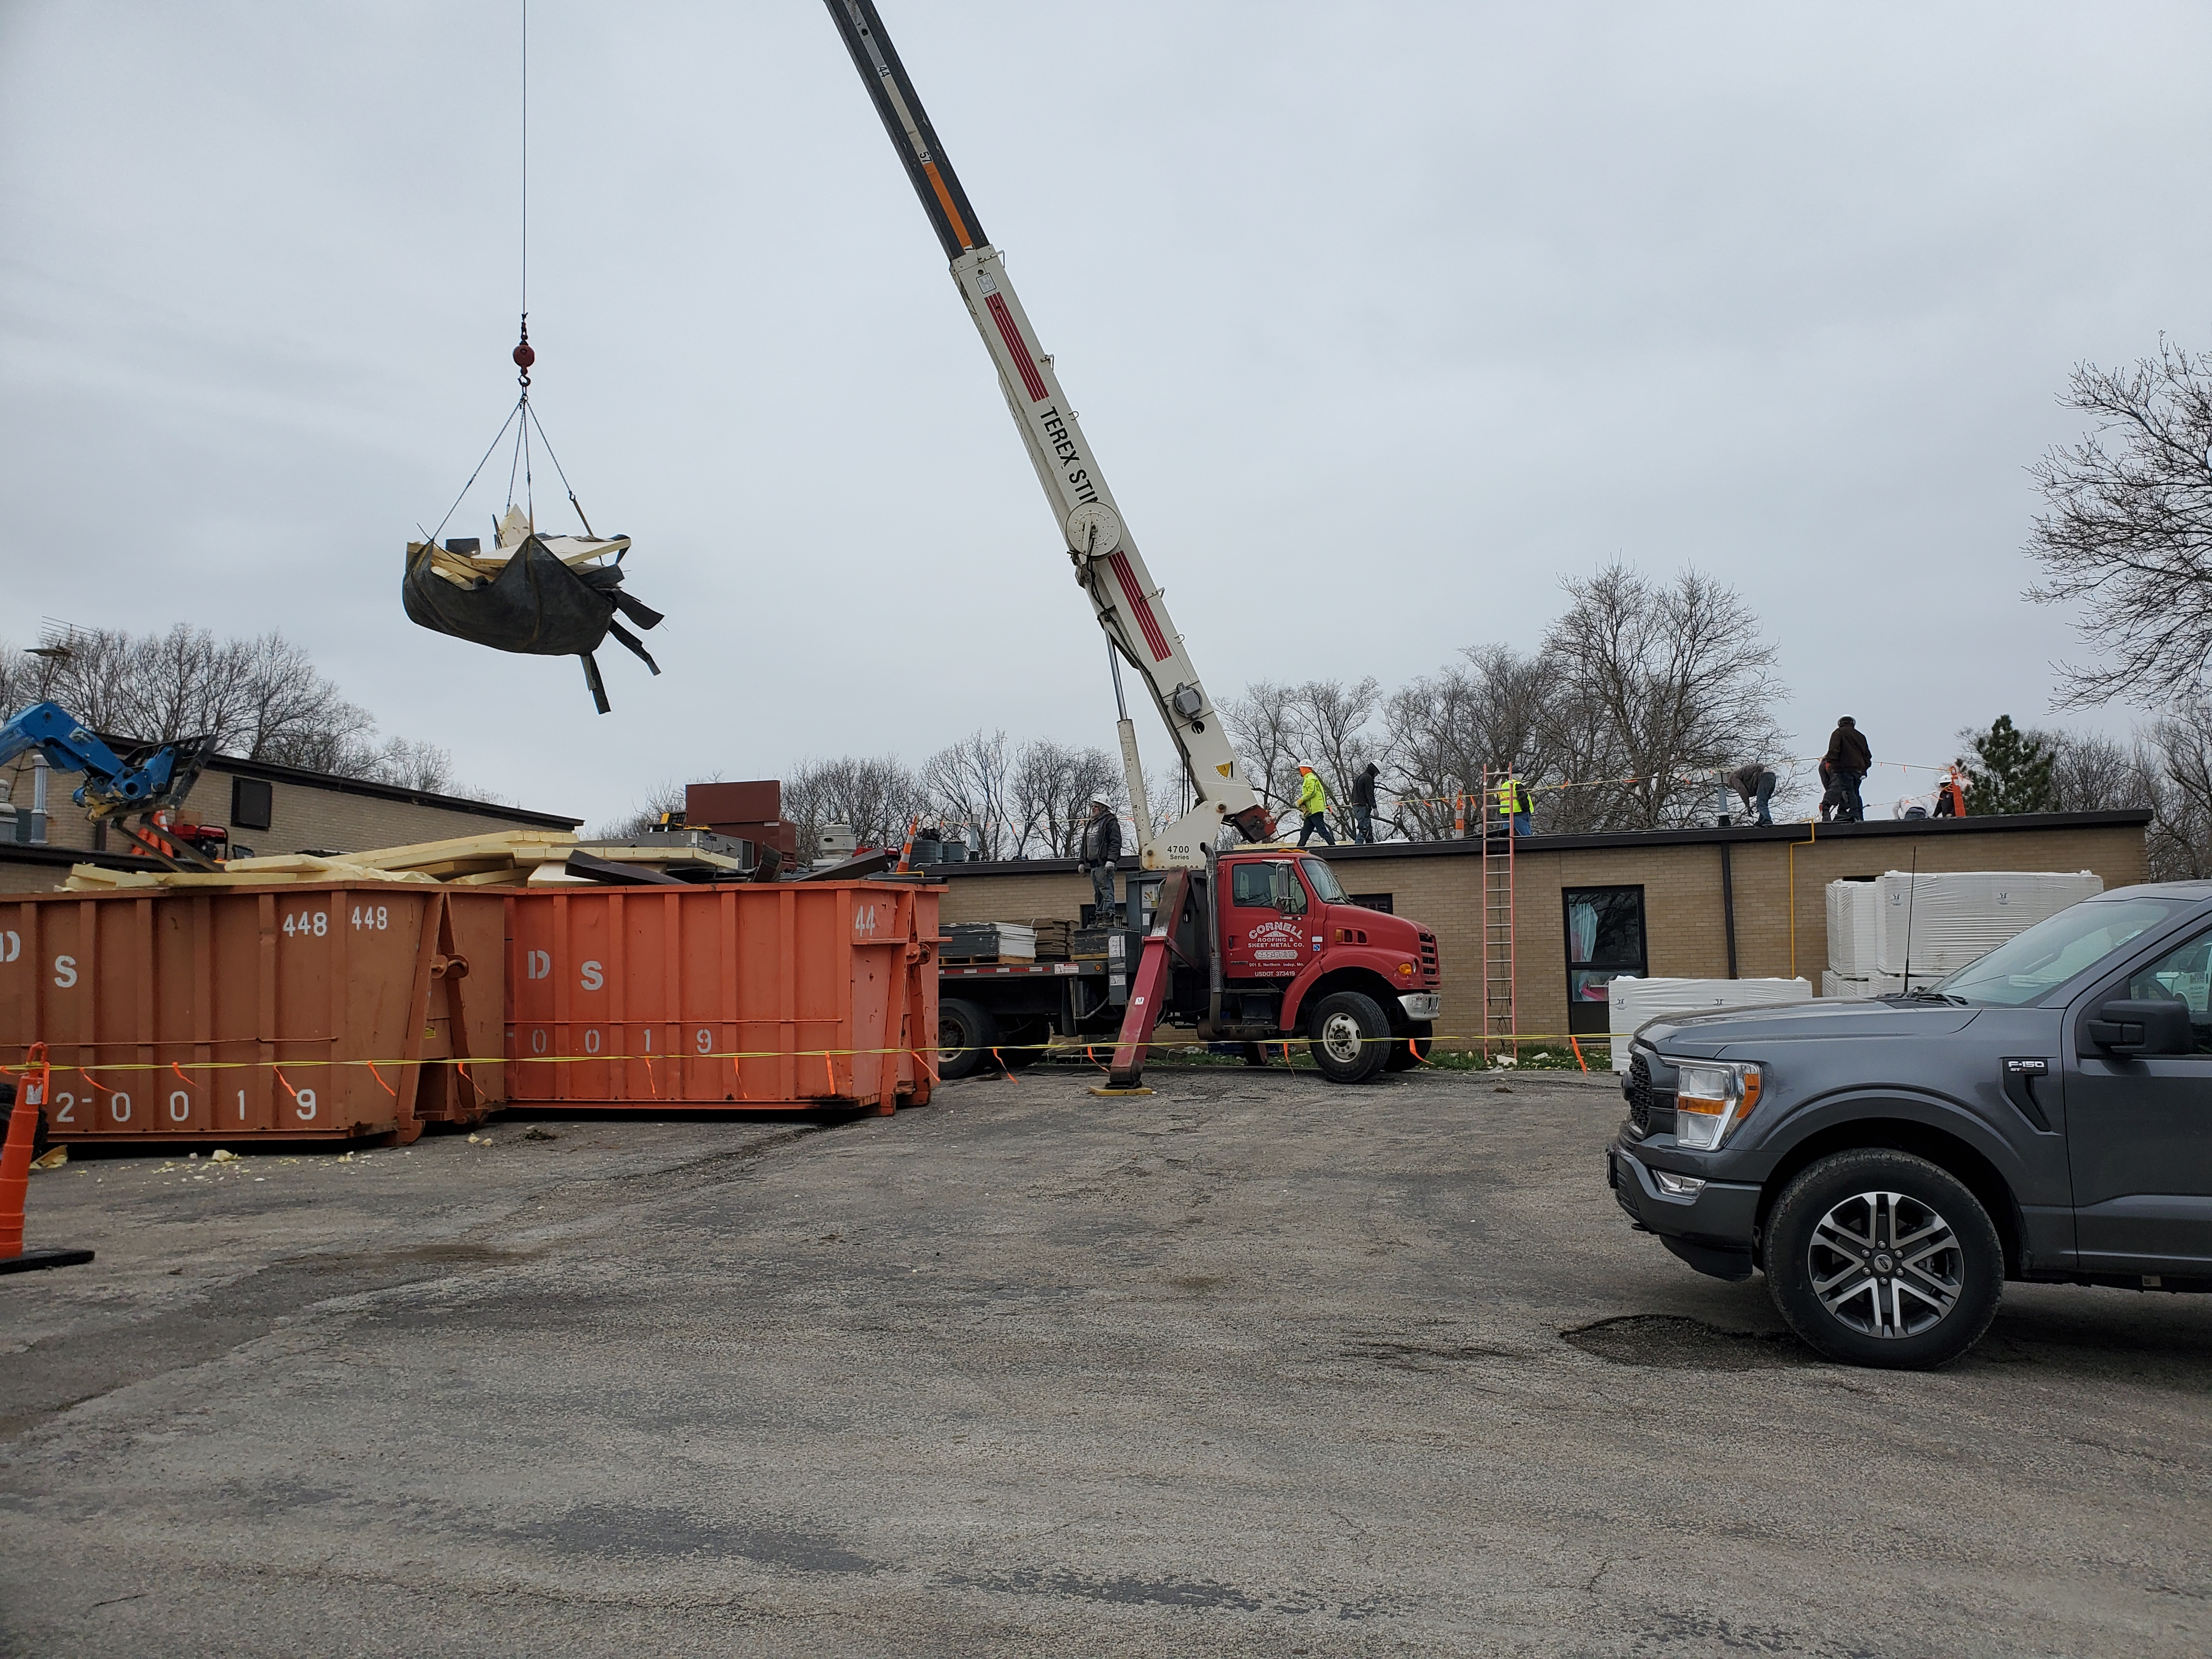 orange dumpsters in front of amazonia elementary school. a large crane lifts heavy roofing materials onto the roof 